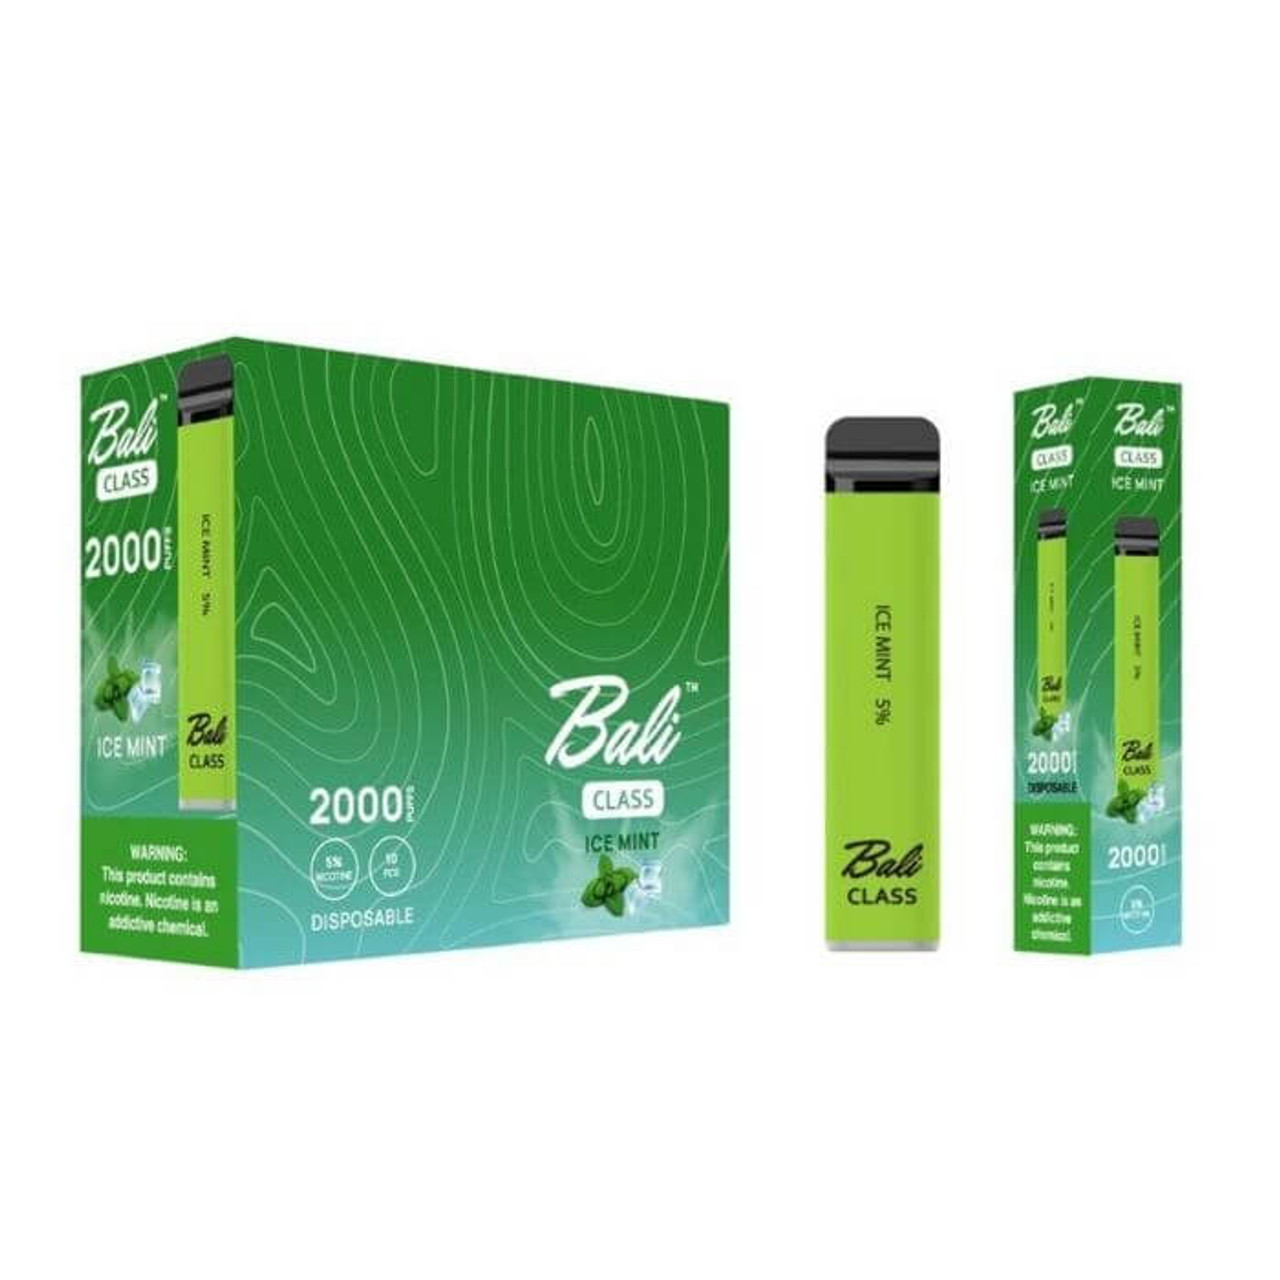 Bali Class Disposable Vape Device: Puff Your Way to Bliss with 2000 Puffs